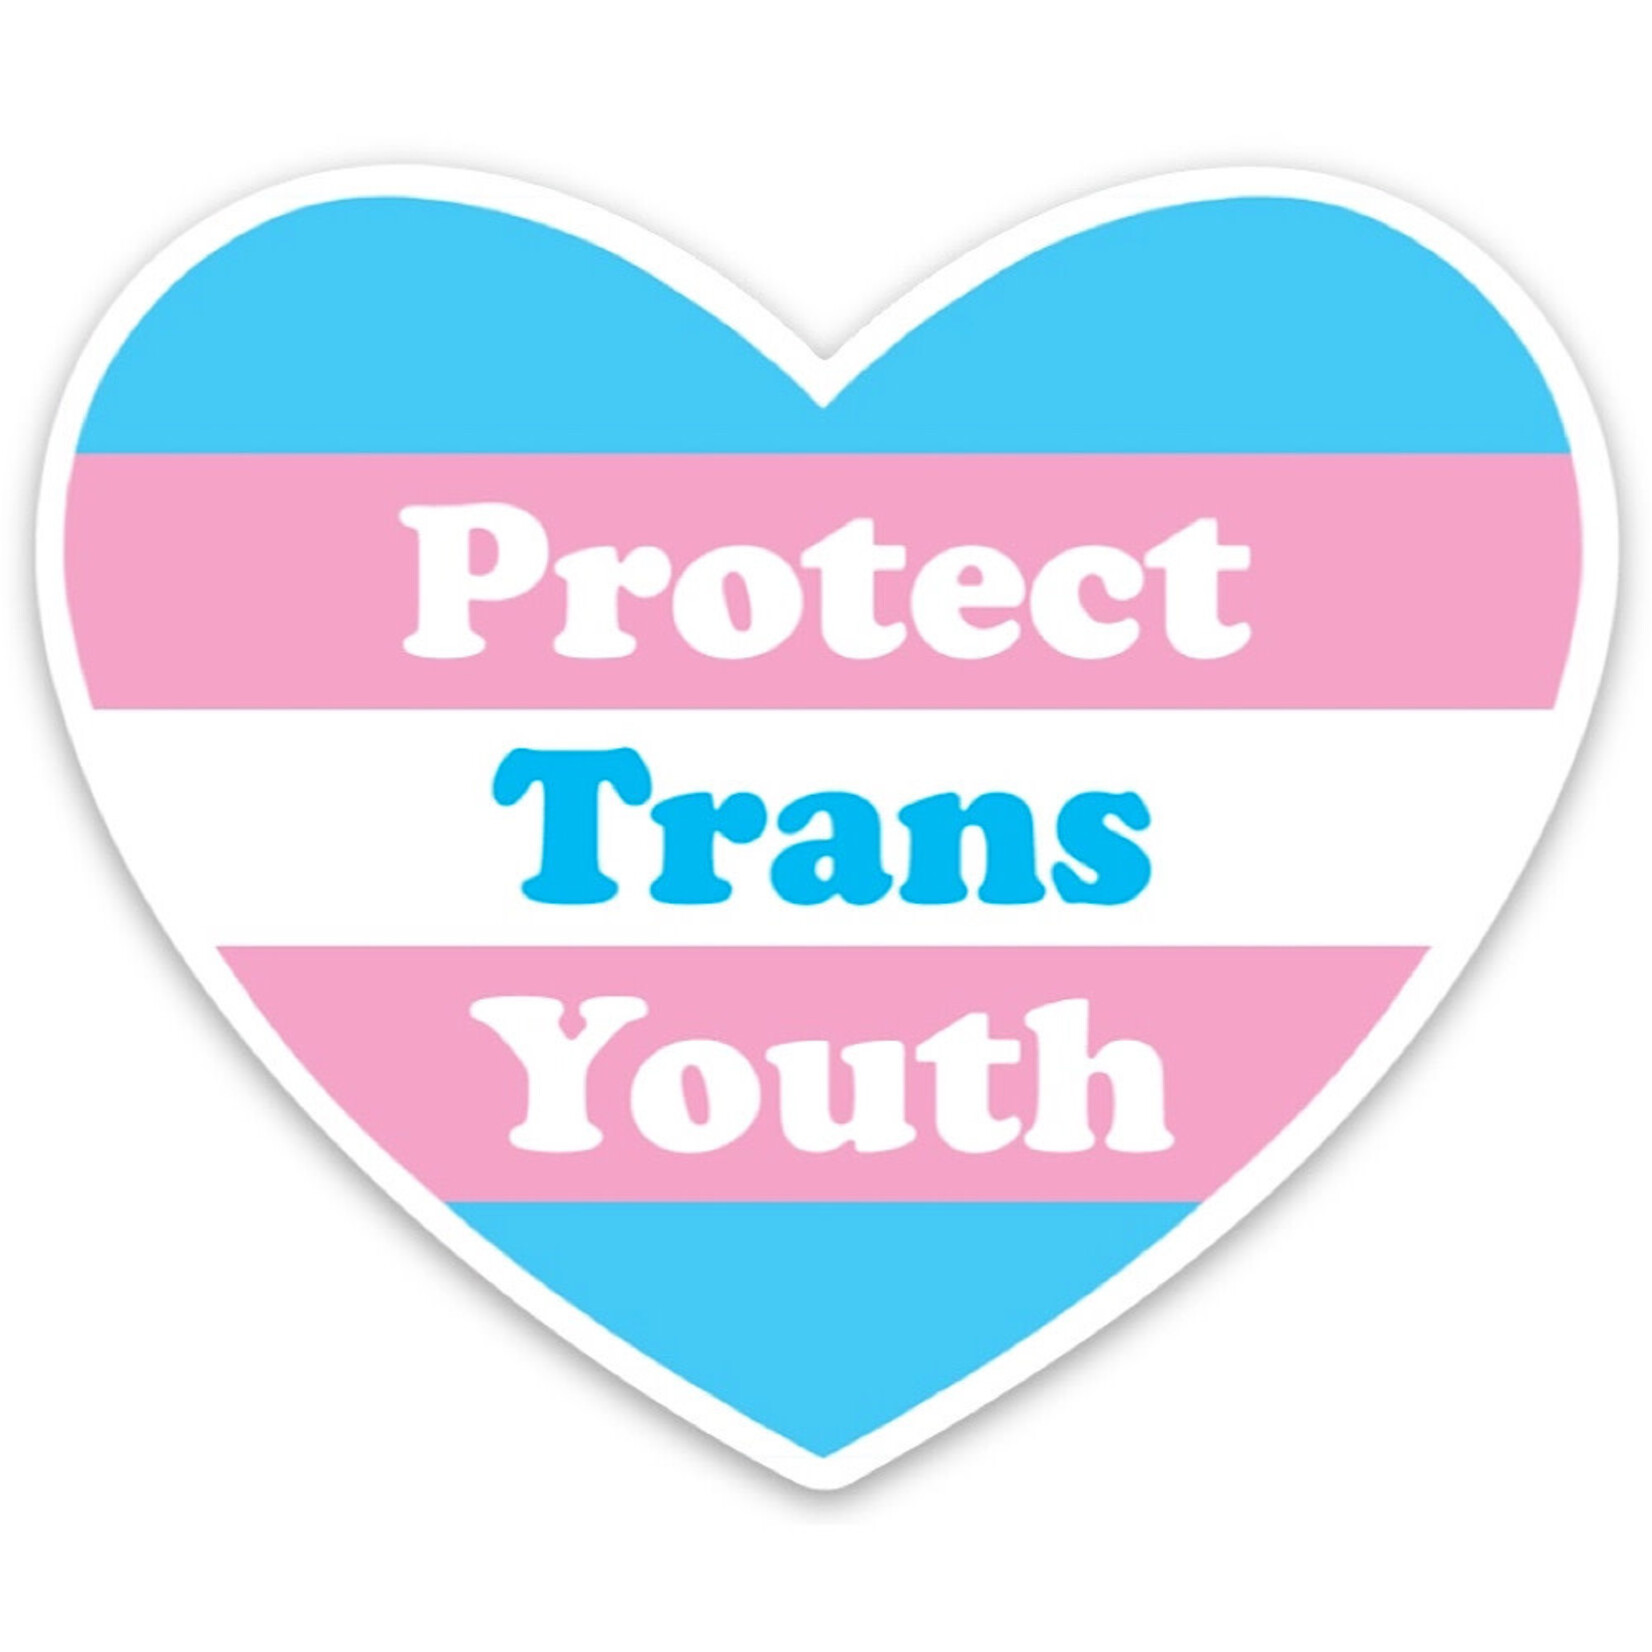 Sticker - Protect trans youth (heart)